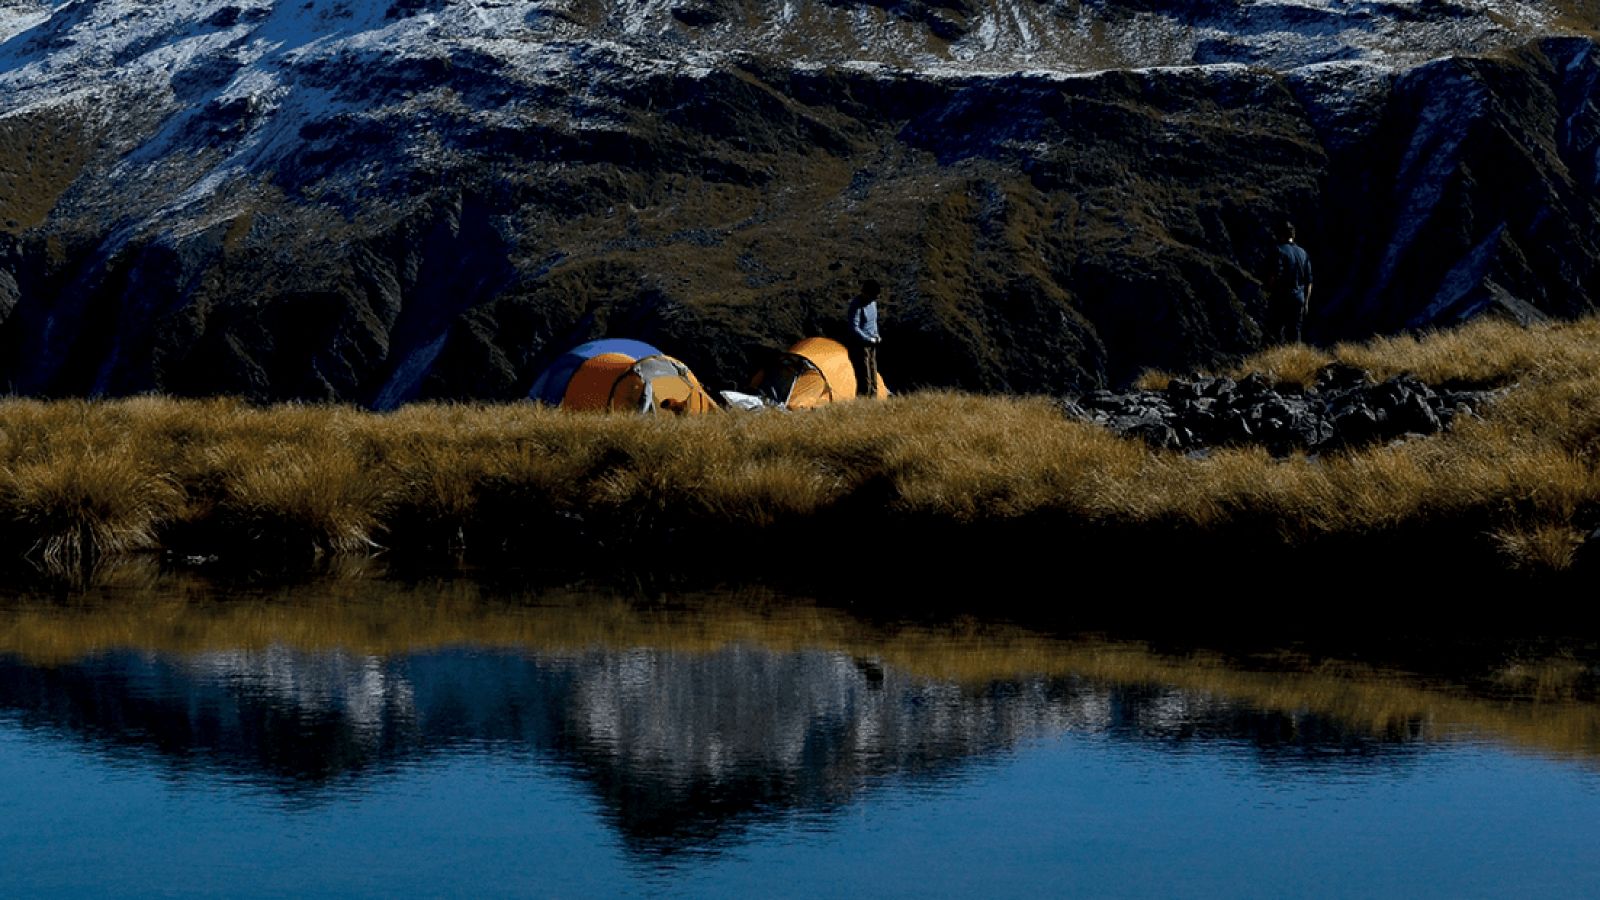 An image of two yellow tents setup by water with mountains in the background.